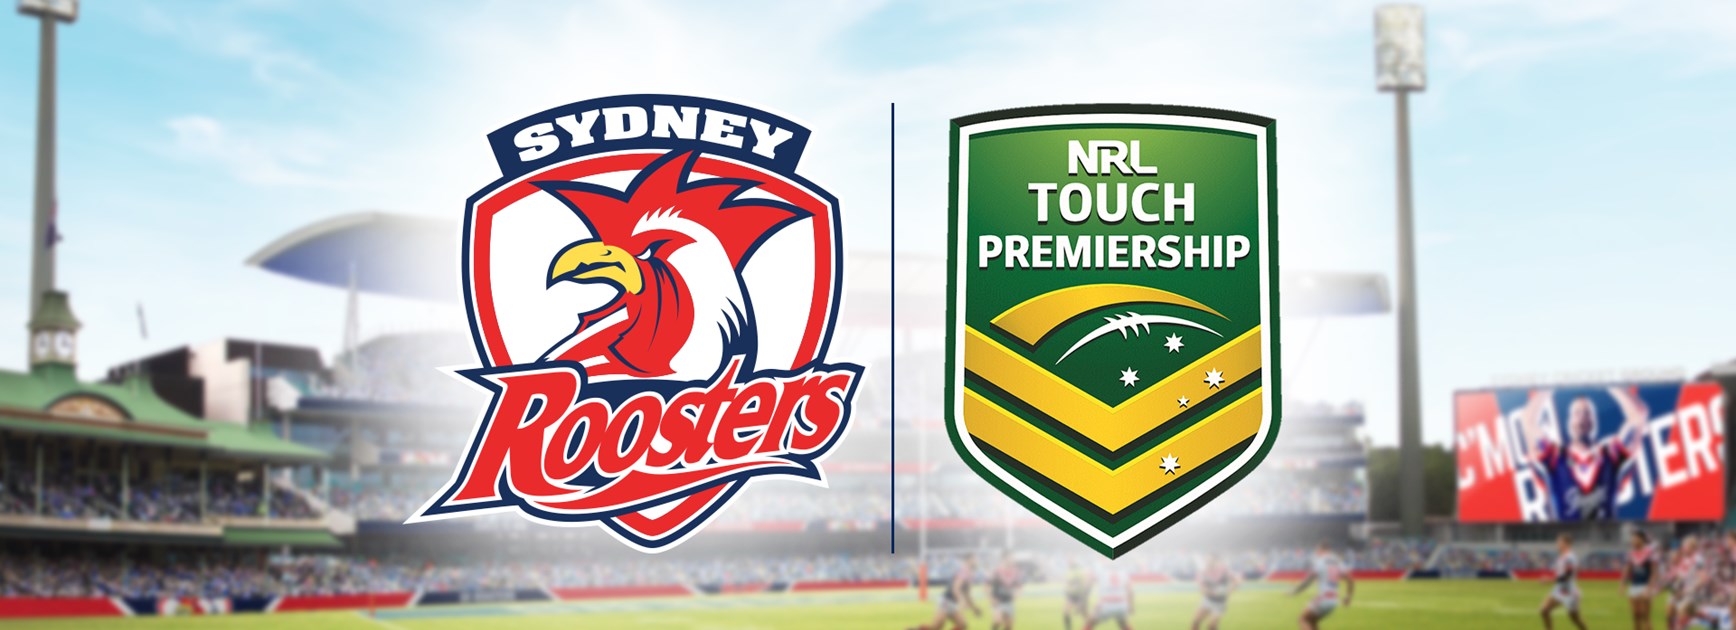 Sydney Roosters Join 2019 Touch Premiership